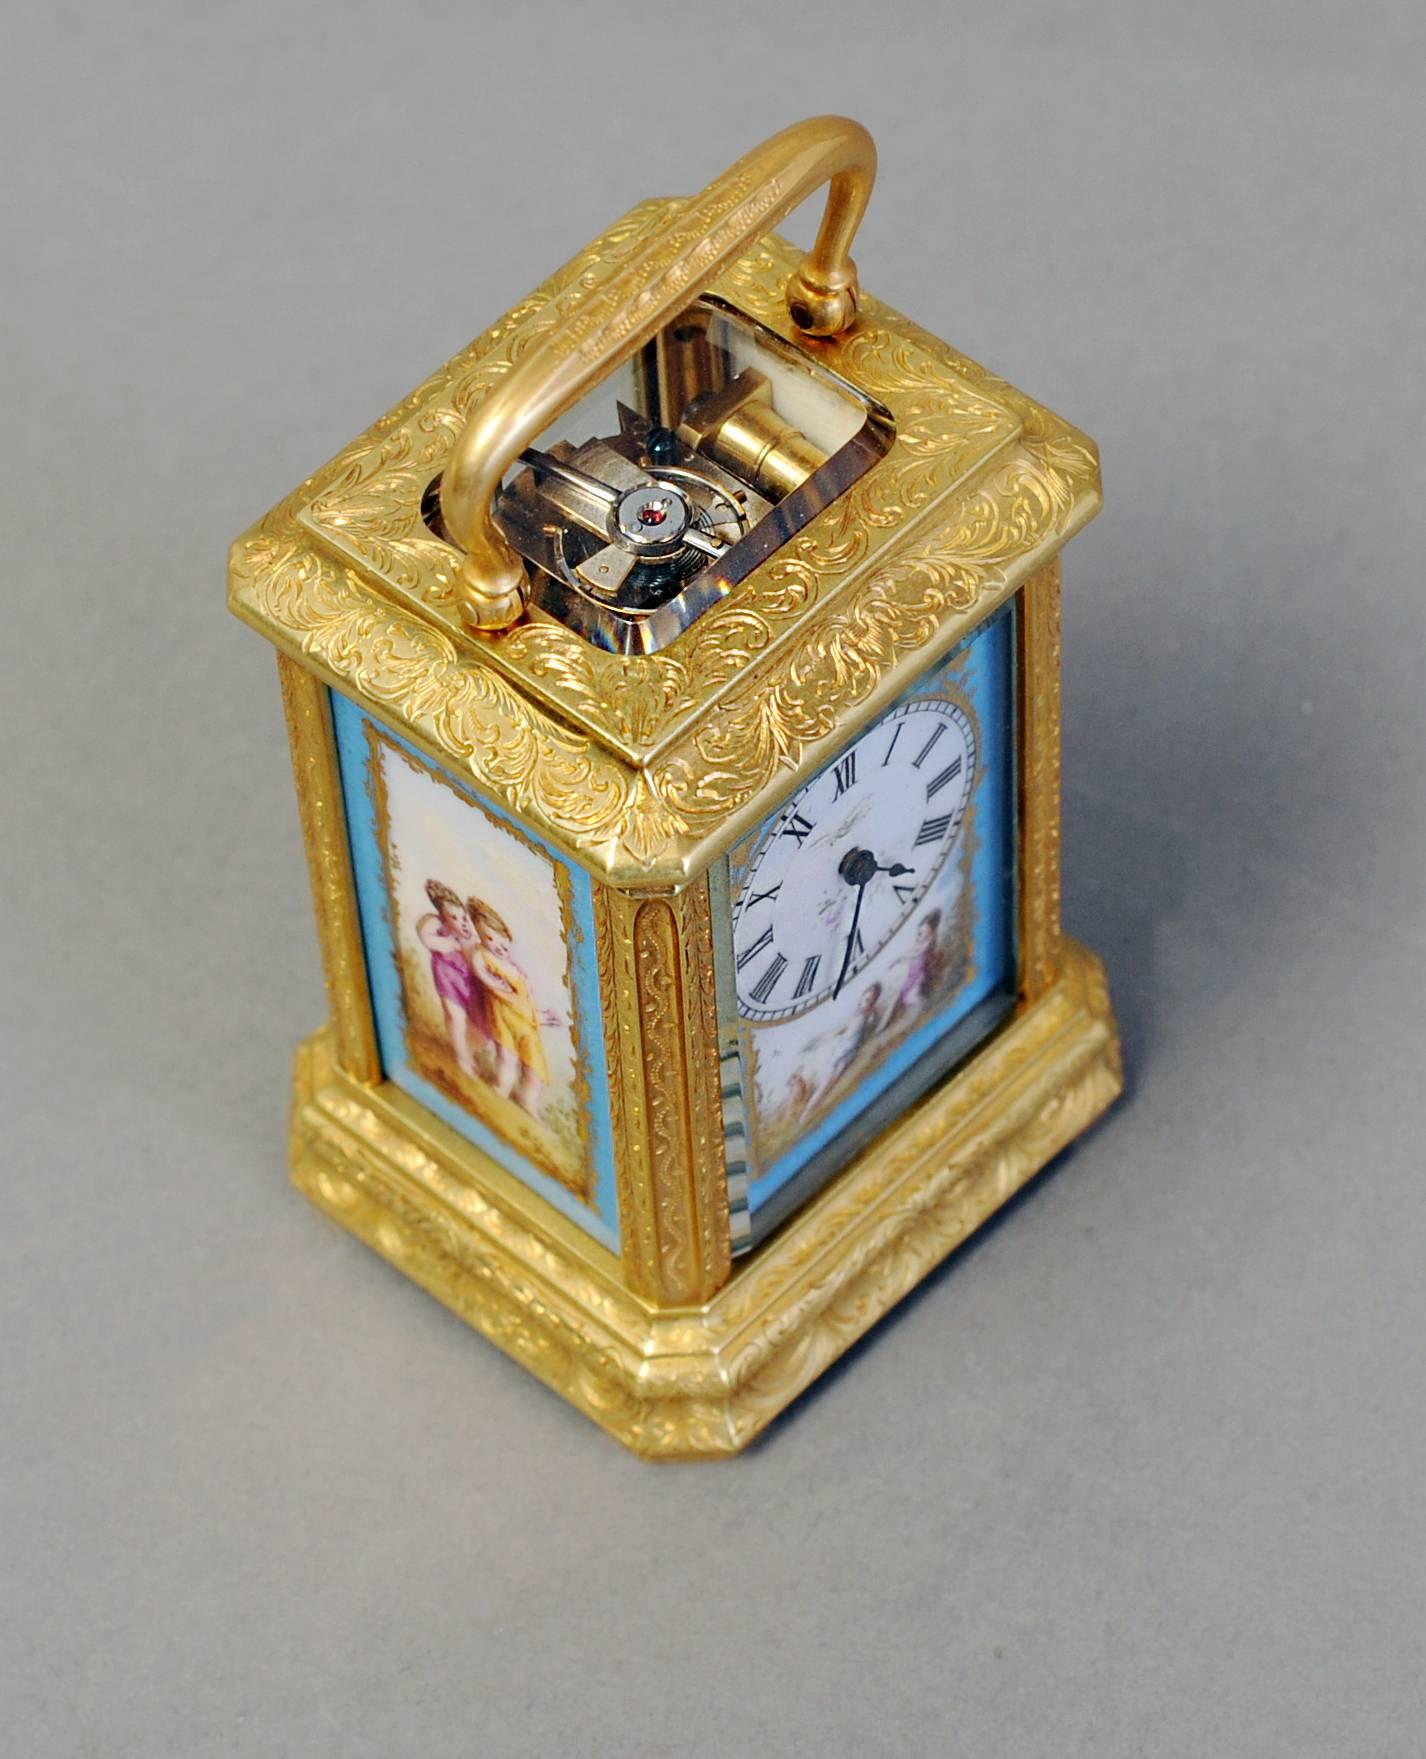 A good mid-19th century miniature carriage clock with lovely detailed panels showing romantic scenes. The guilt bronze nicely engraved gorge case with glass top. The Eight-day movement with silvered lever platform escarpment with compensated